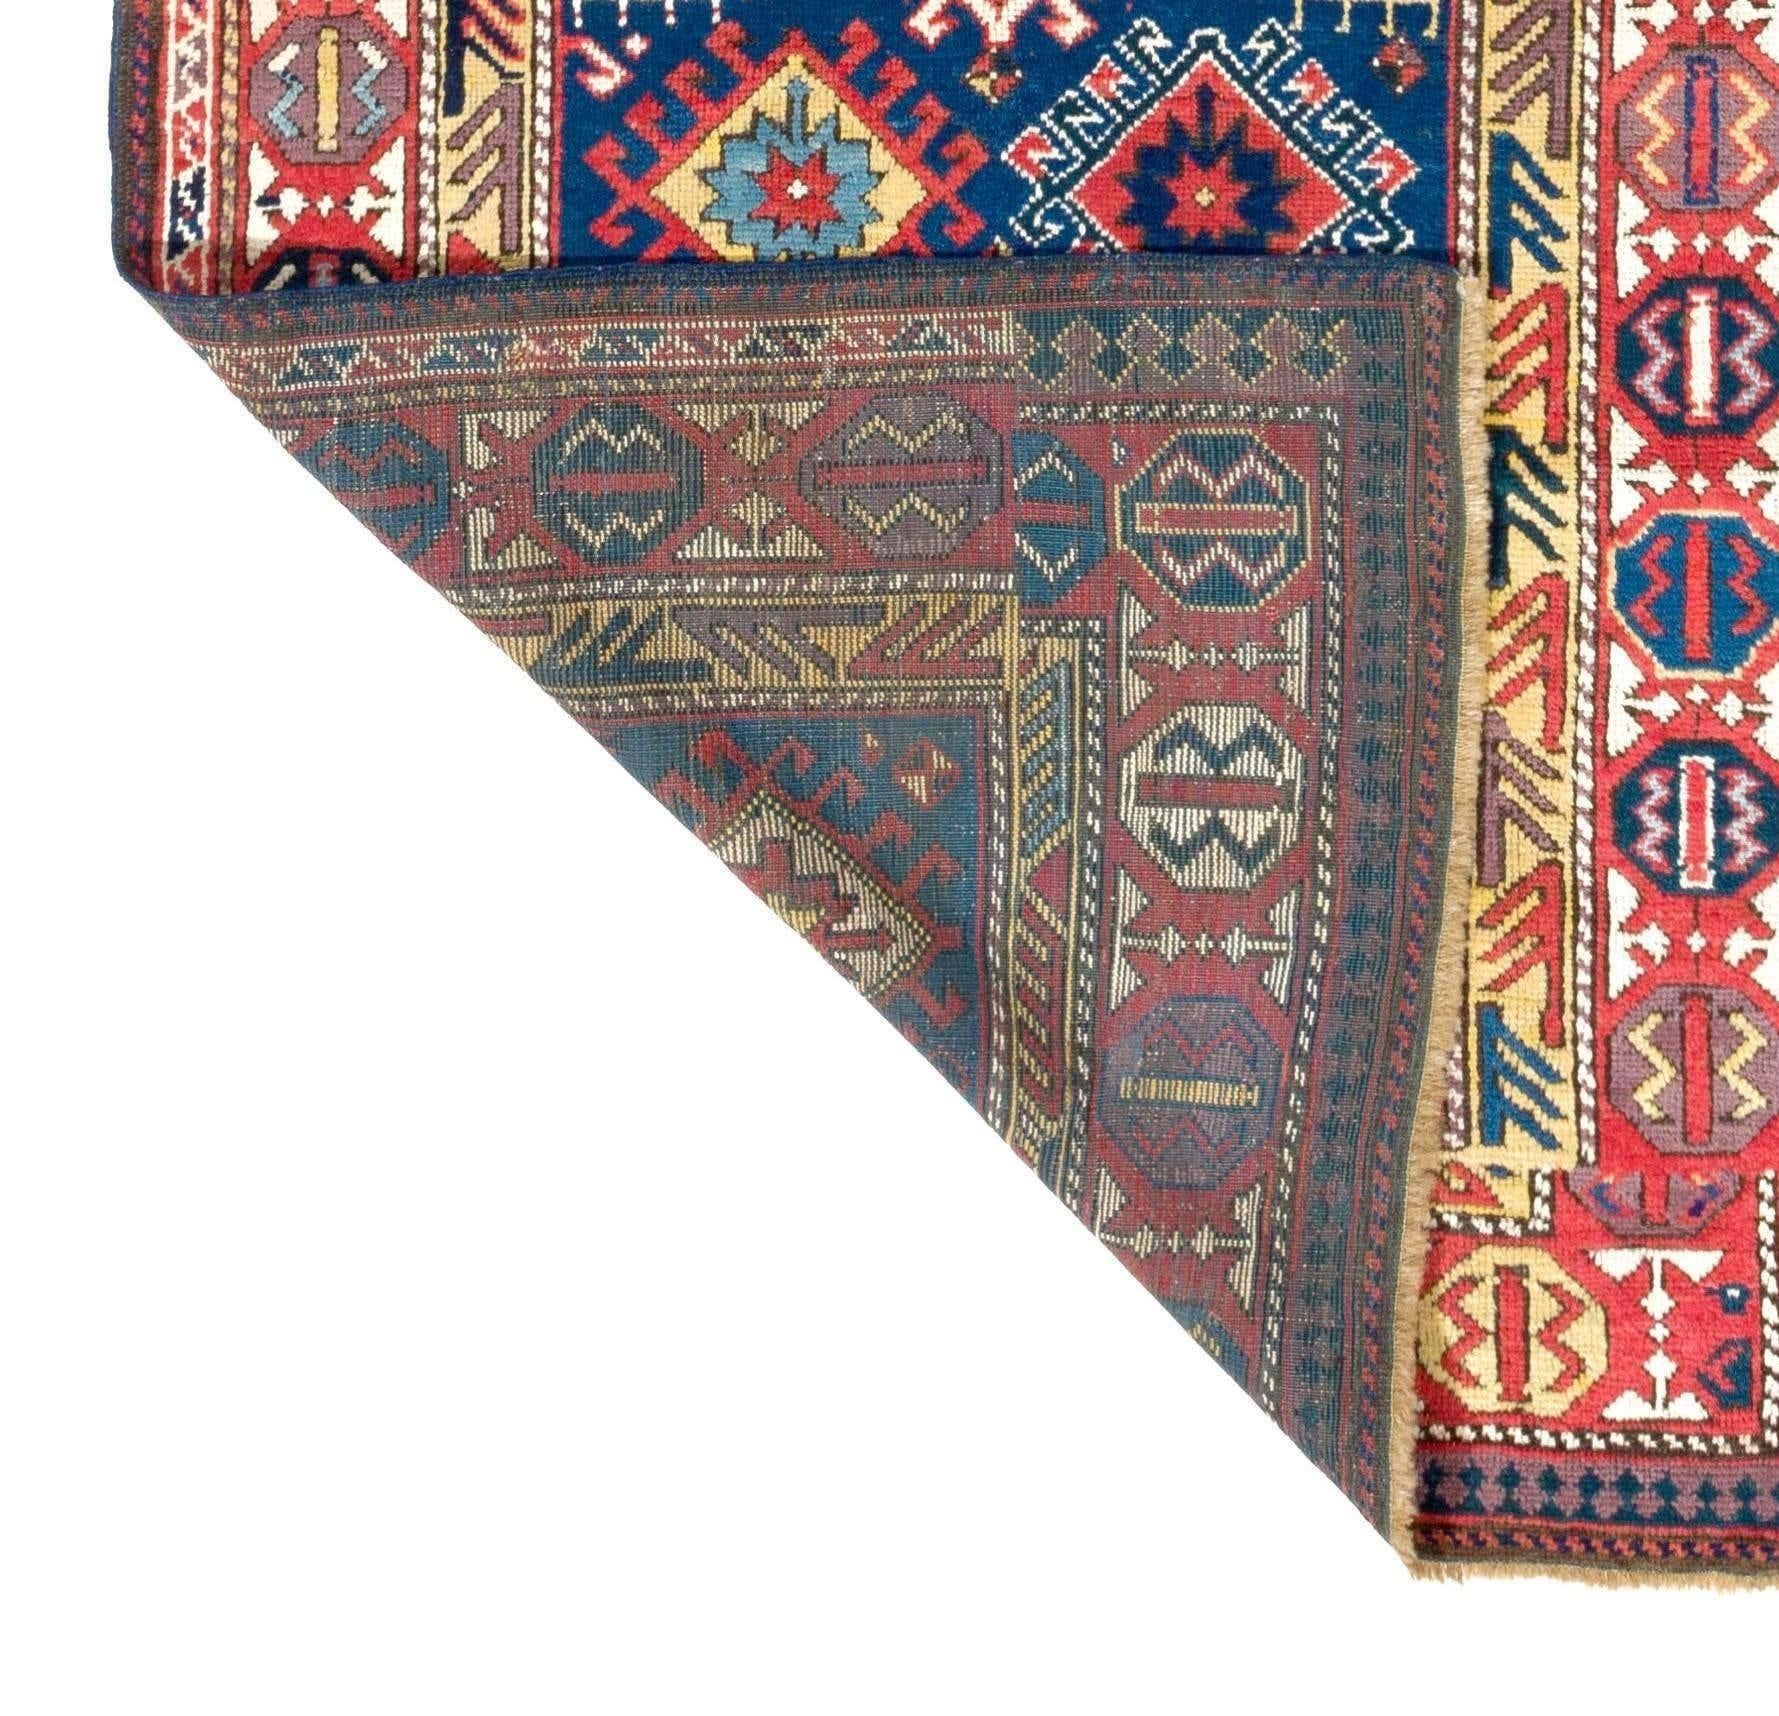 This antique Shahsavan is an expressive piece of nomadic spirit hand-knotted by the northeastern Persian tribes of the 19th century. It is made up of four connected square sections of differing sizes taking up the entire space of the field with a